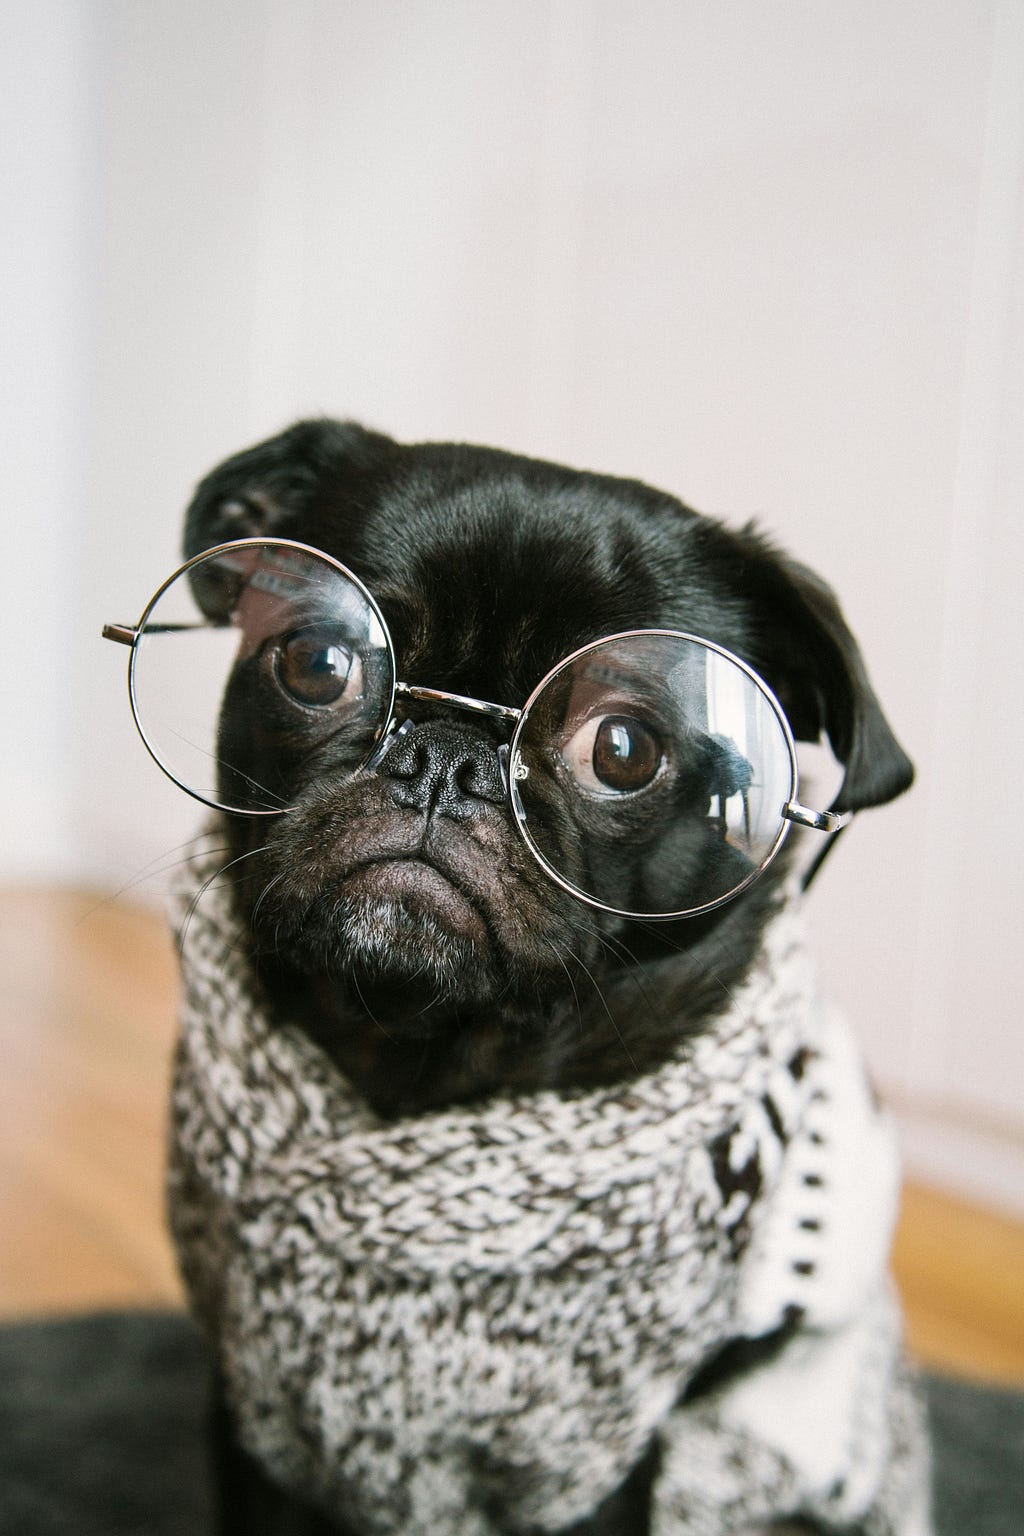 A cute doggo wearing round glasses and looking very intellectual